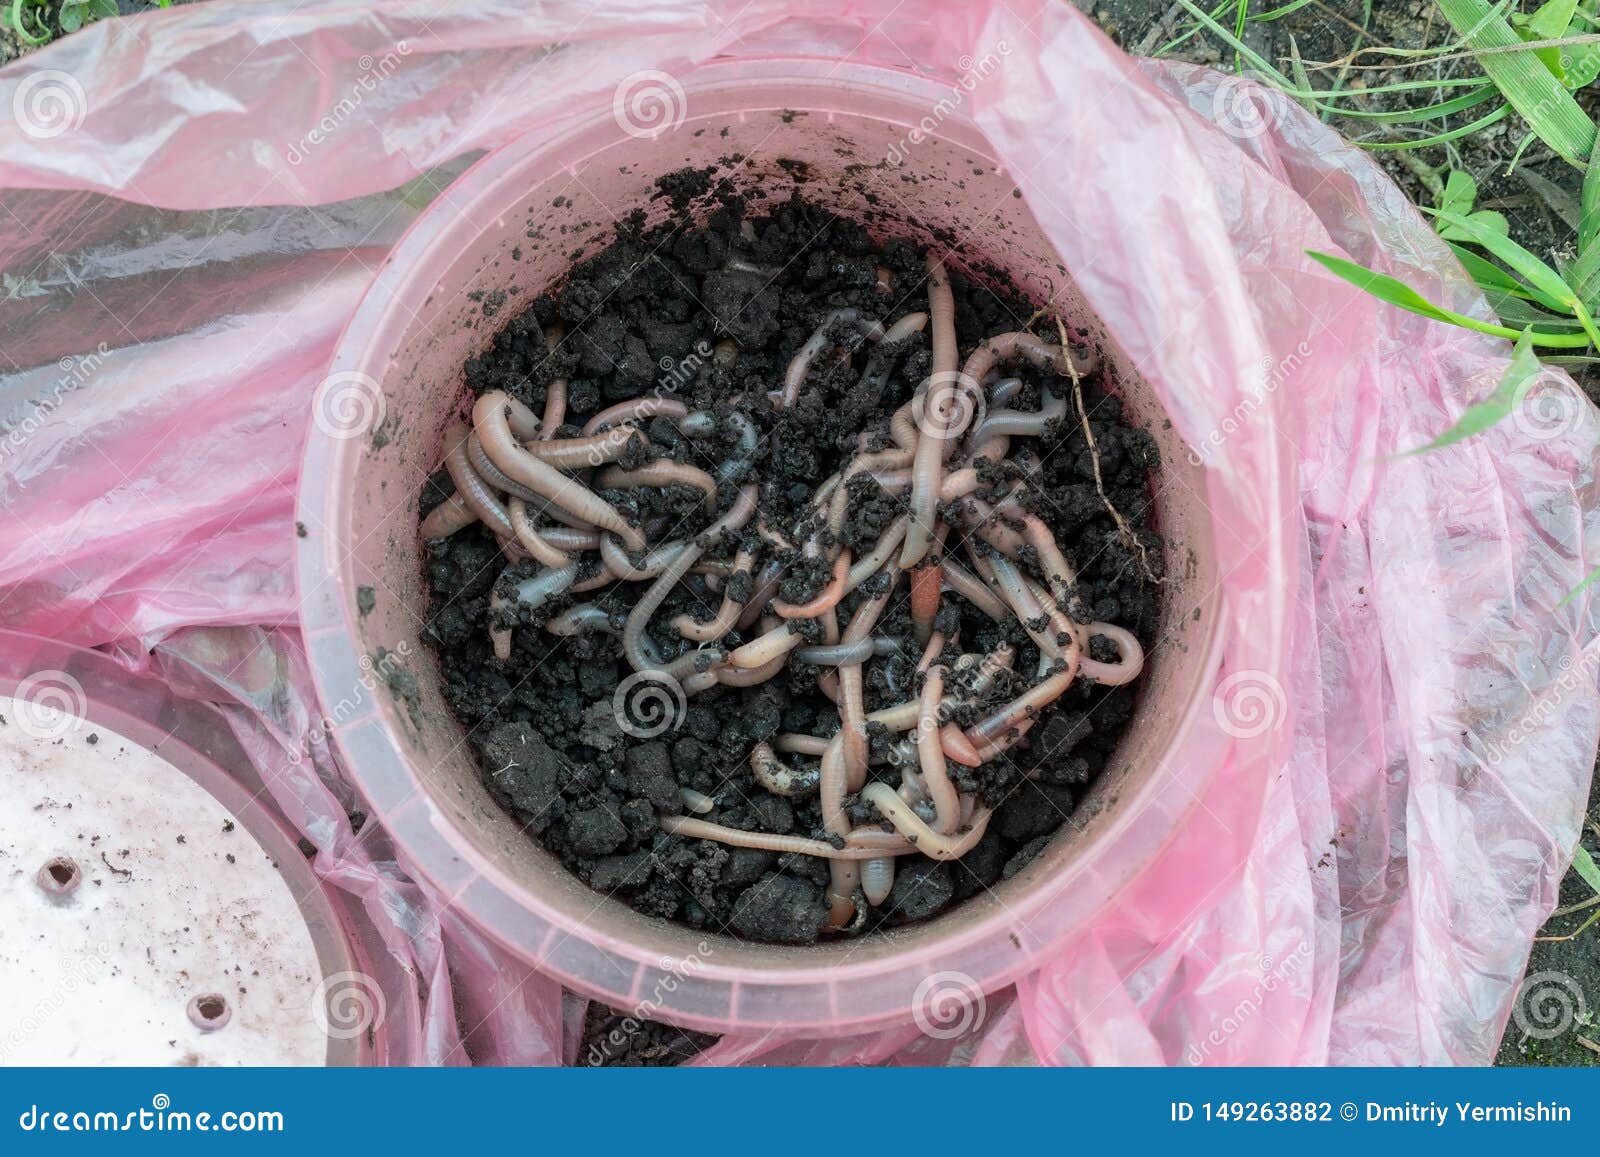 https://thumbs.dreamstime.com/z/worm-fishing-bait-live-worms-plastic-container-149263882.jpg